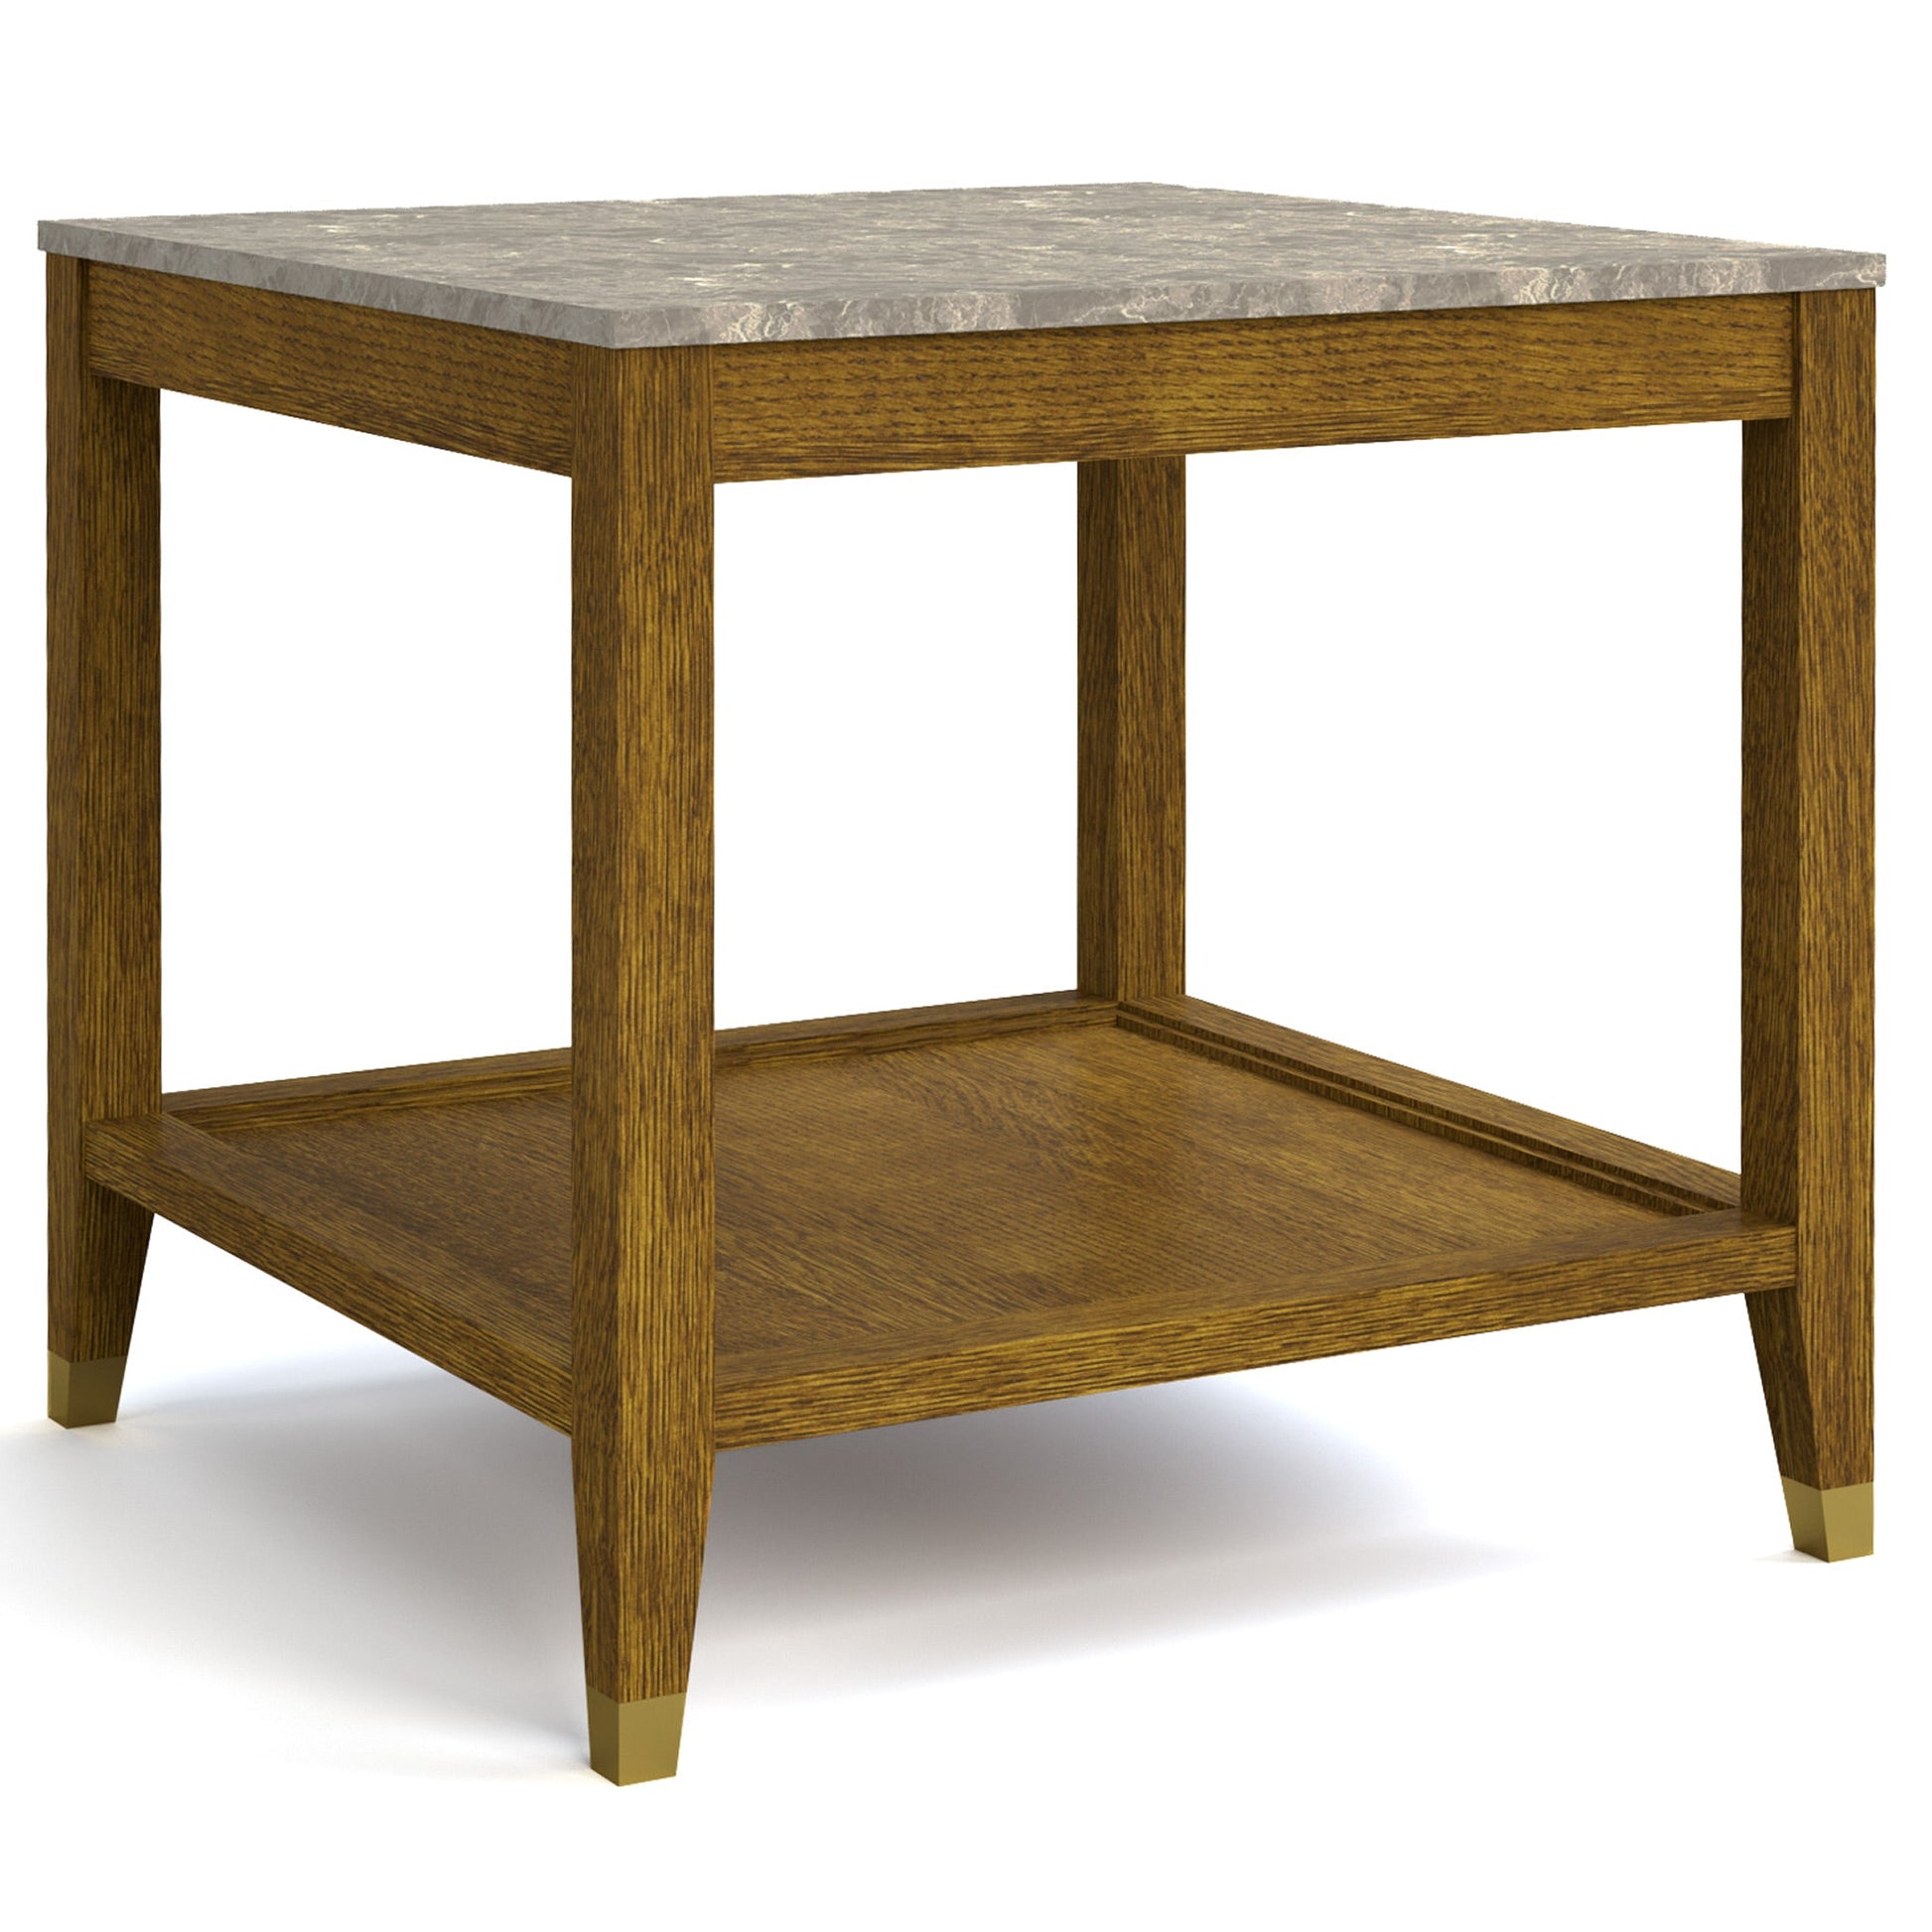 Surrey Hills Side Table, stone top in 507-Bay Brown